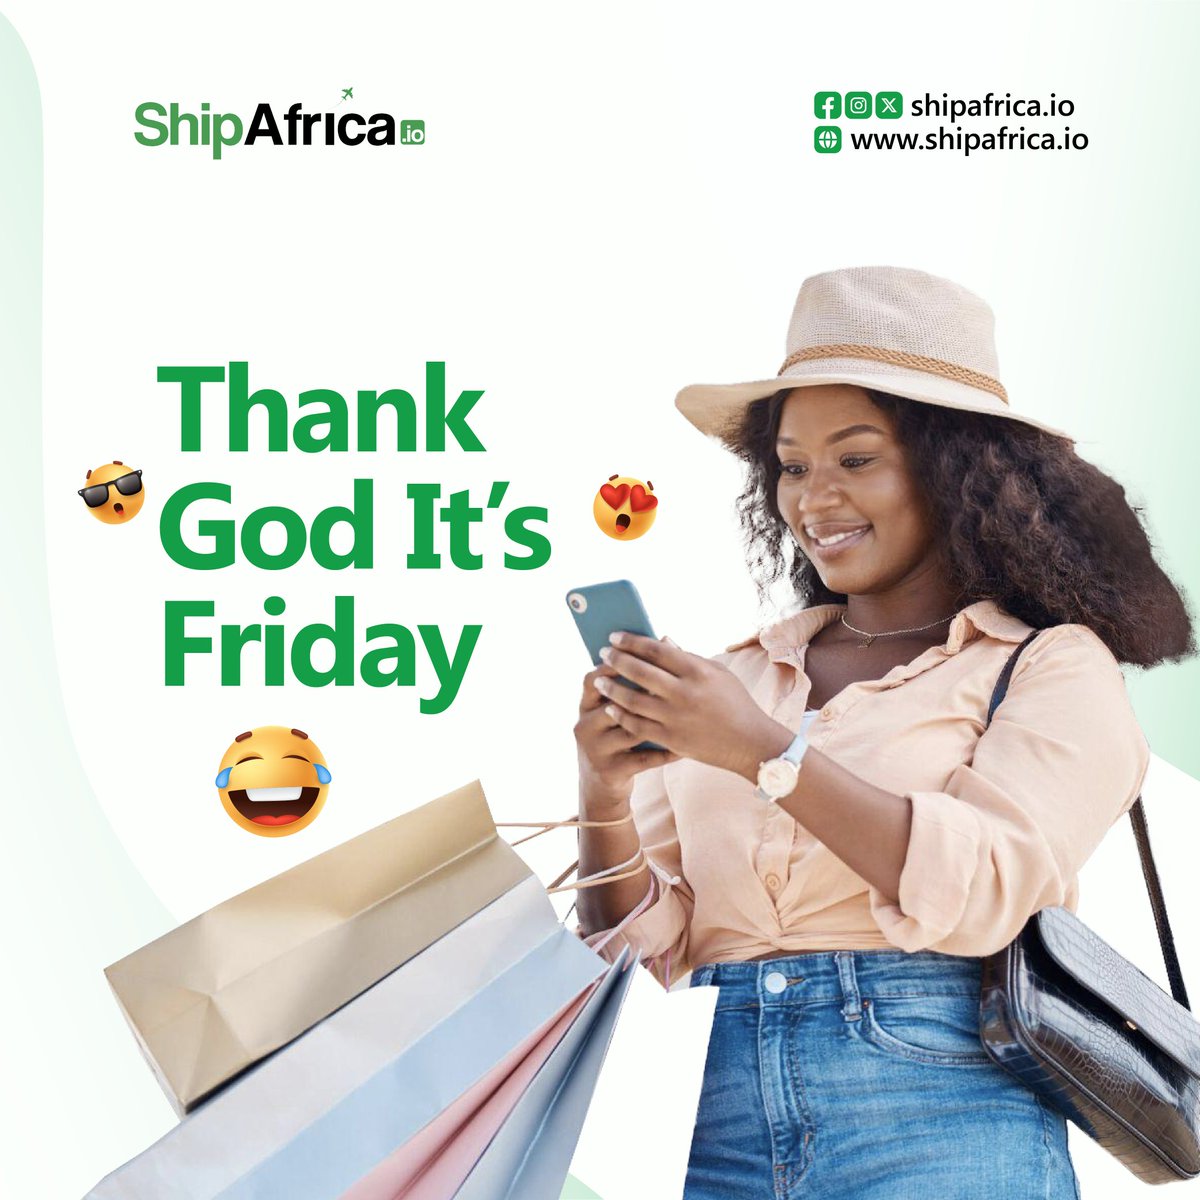 When you realize it’s Friday and ShipAfrica has your back for weekend shipping.

You do 
the shopping; we do the shipping.

We ship locally and internationally!

#smallbusinessowner #lagosbusiness #shipafrica #worldwideshipping 
#internationalshipping #womenbags